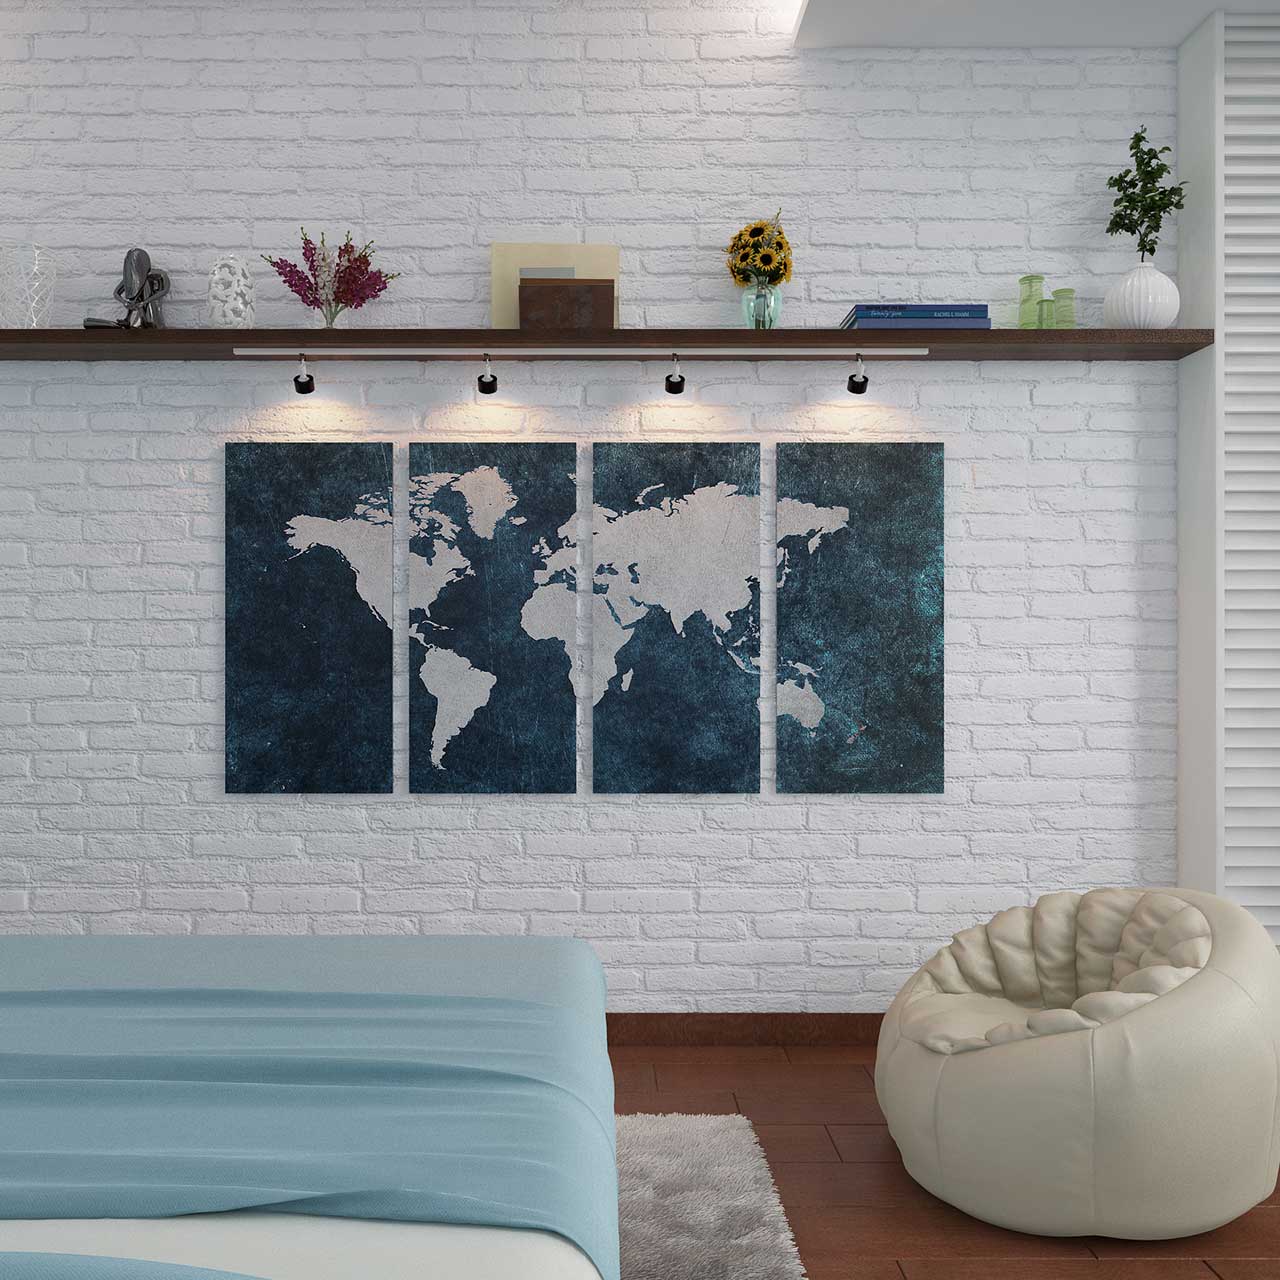 Bedroom design check-list: map 3D wall painting design brings in fresh energy to a modern bedroom desig